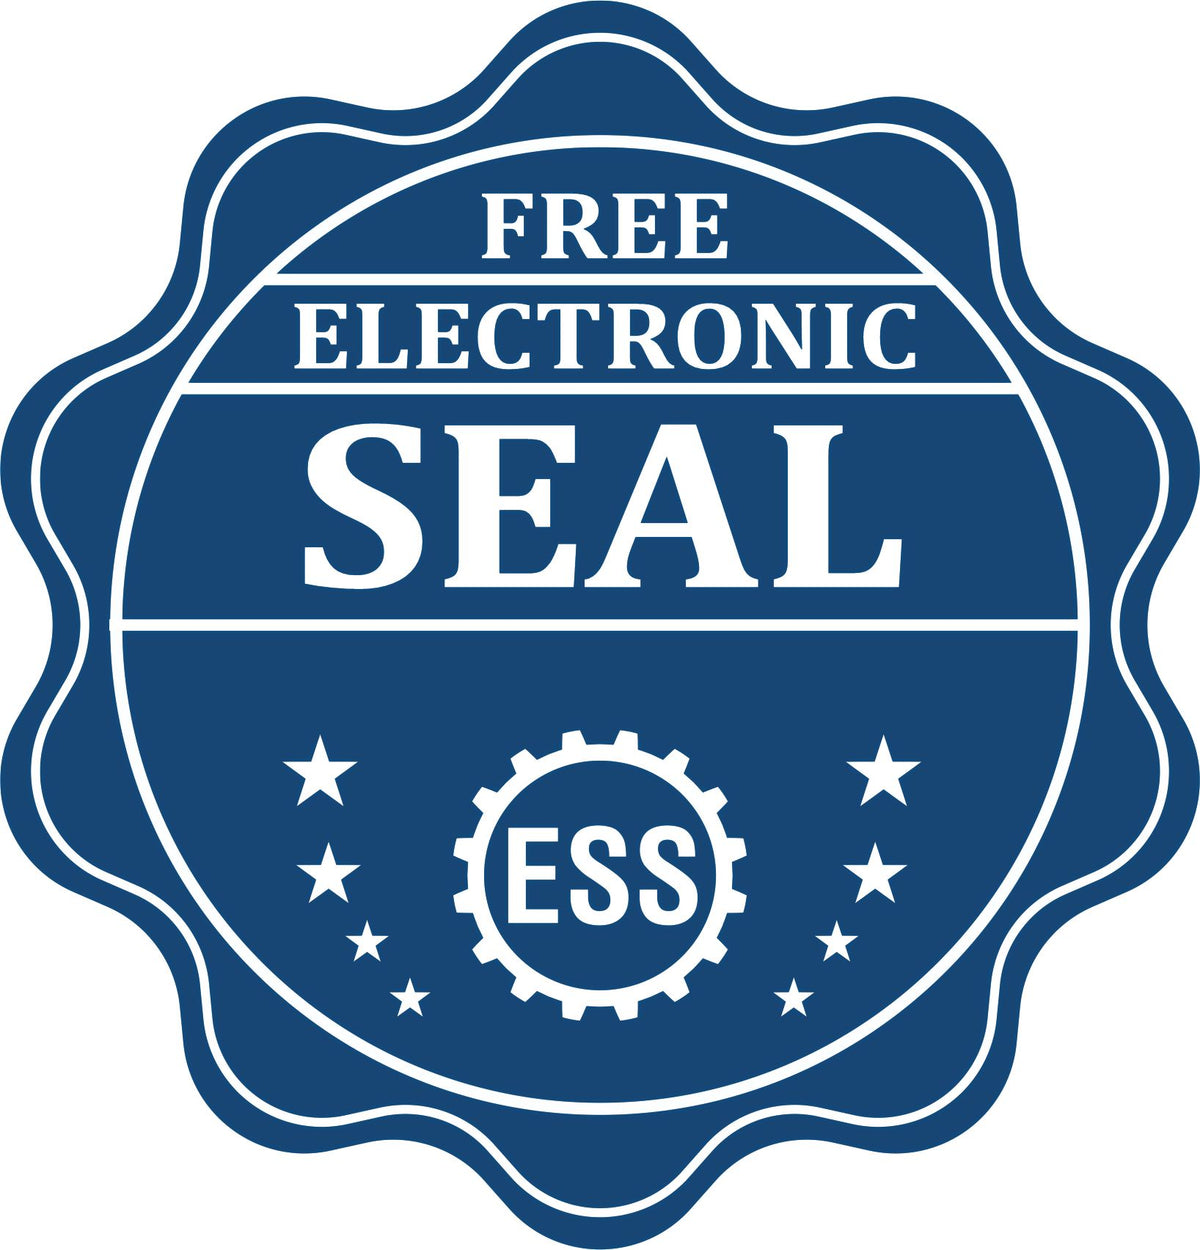 A badge showing a free electronic seal for the Handheld Nevada Architect Seal Embosser with stars and the ESS gear on the emblem.